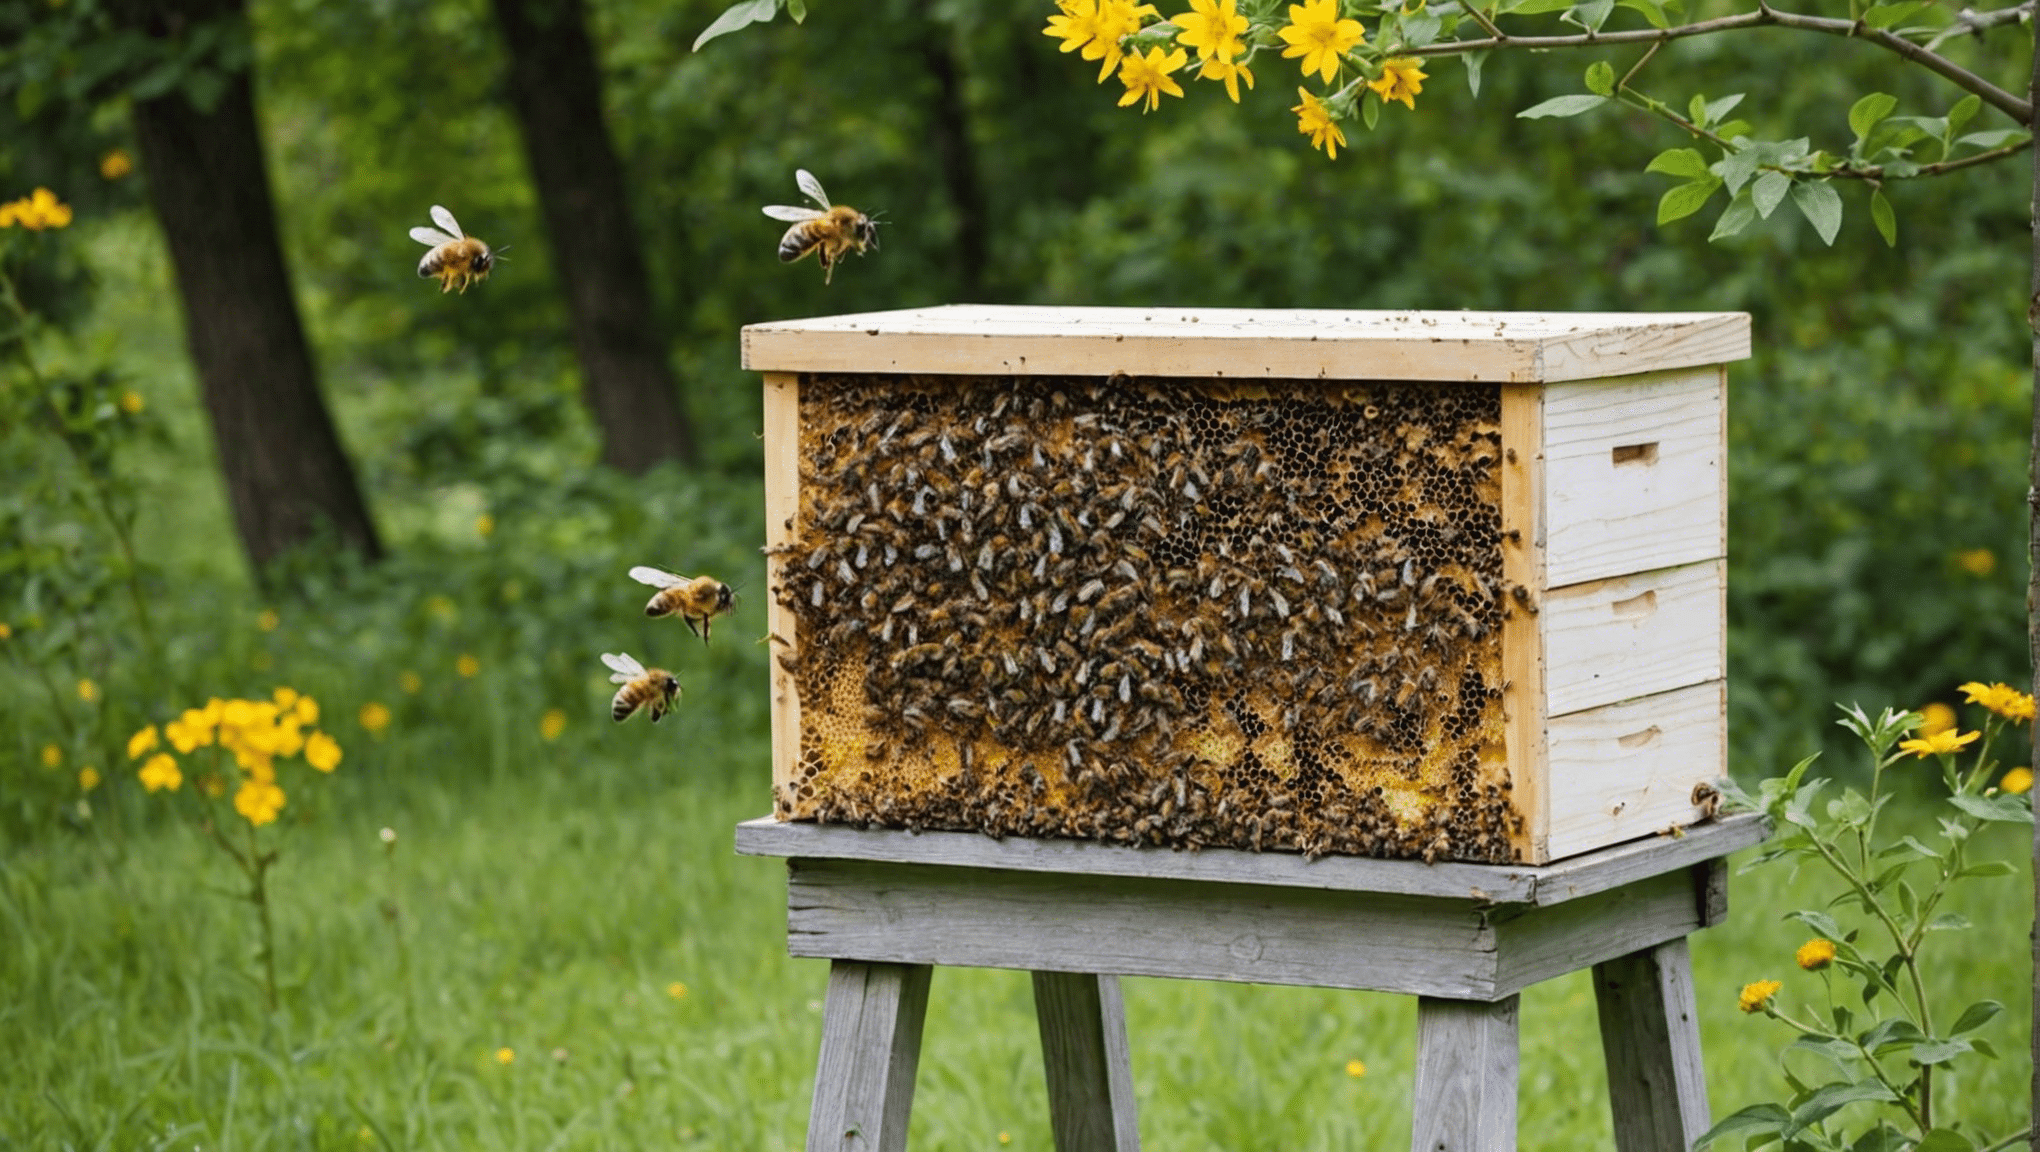 discover everything you need to know about natural honey bee hives in this comprehensive guide, from their unique structure to the benefits they offer.